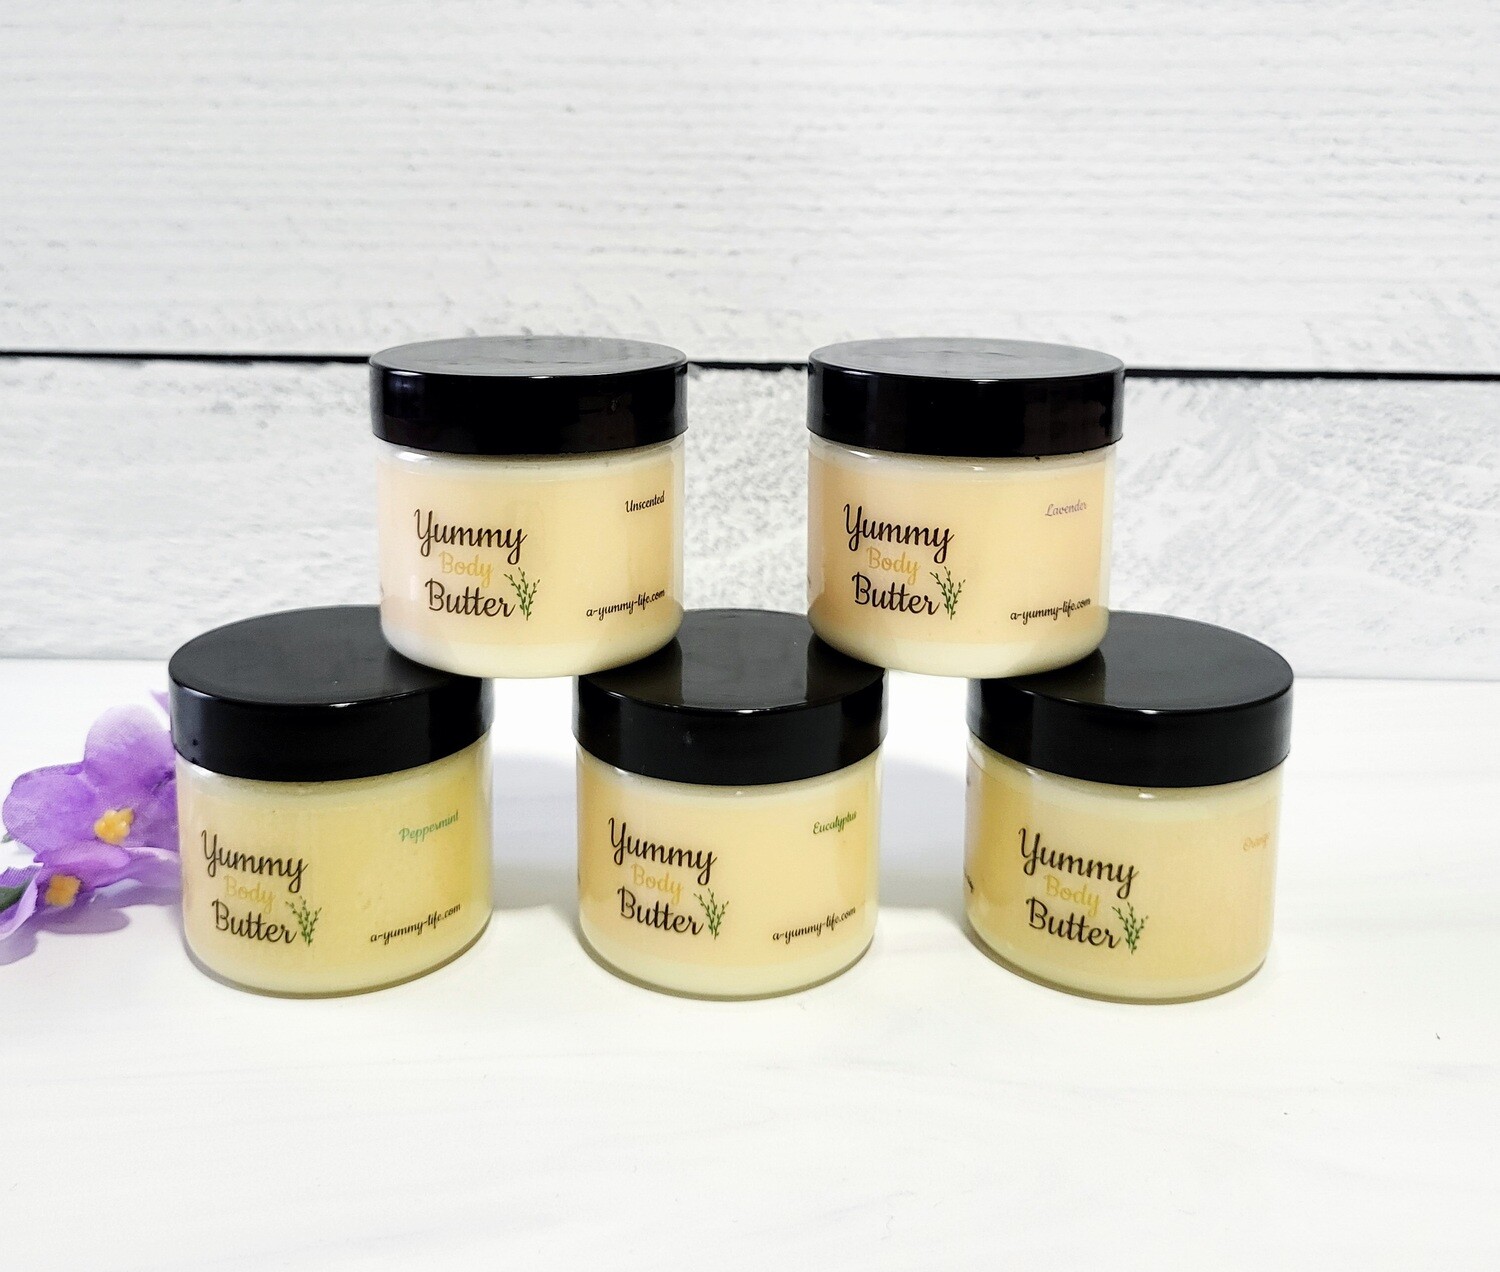 Yummy Body Butter - Sample Pack